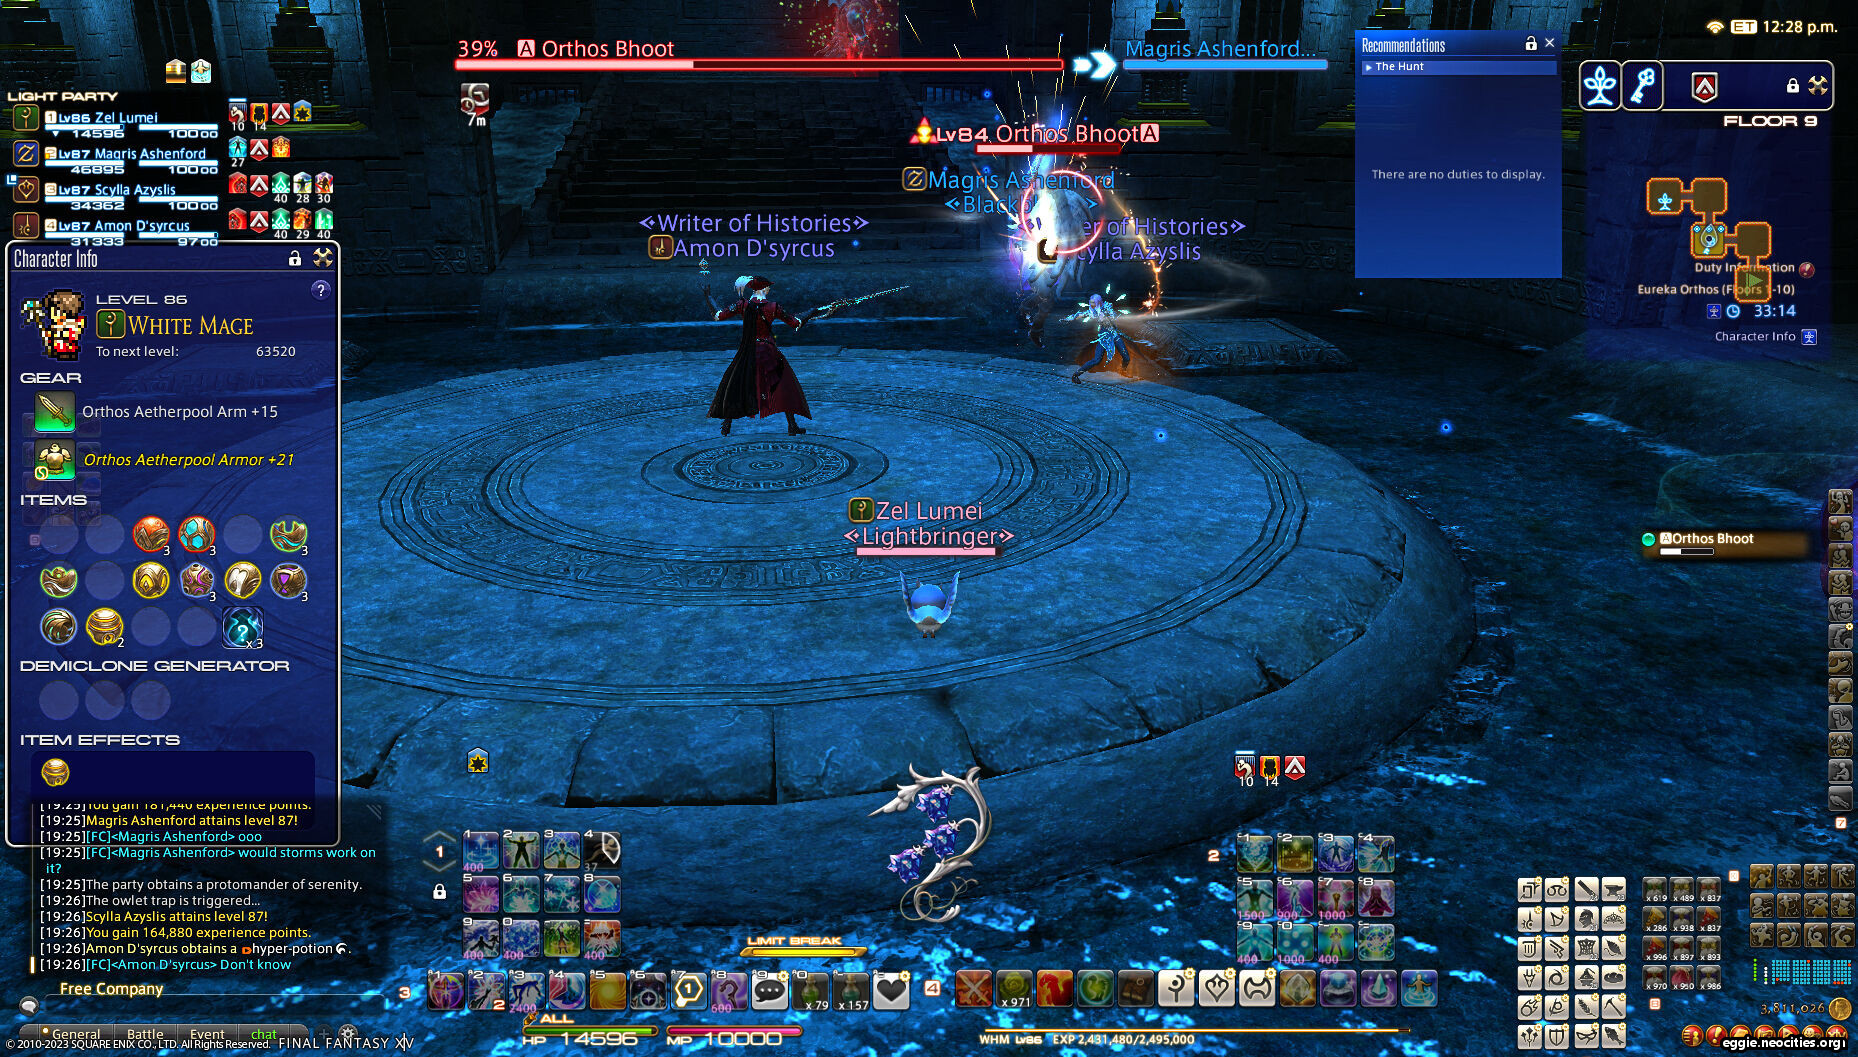 Gameplay inside Eureka Orthos, floor 9. The party is fighting an Orthos Bhoot while Zel is transformed into an owl by a trap.